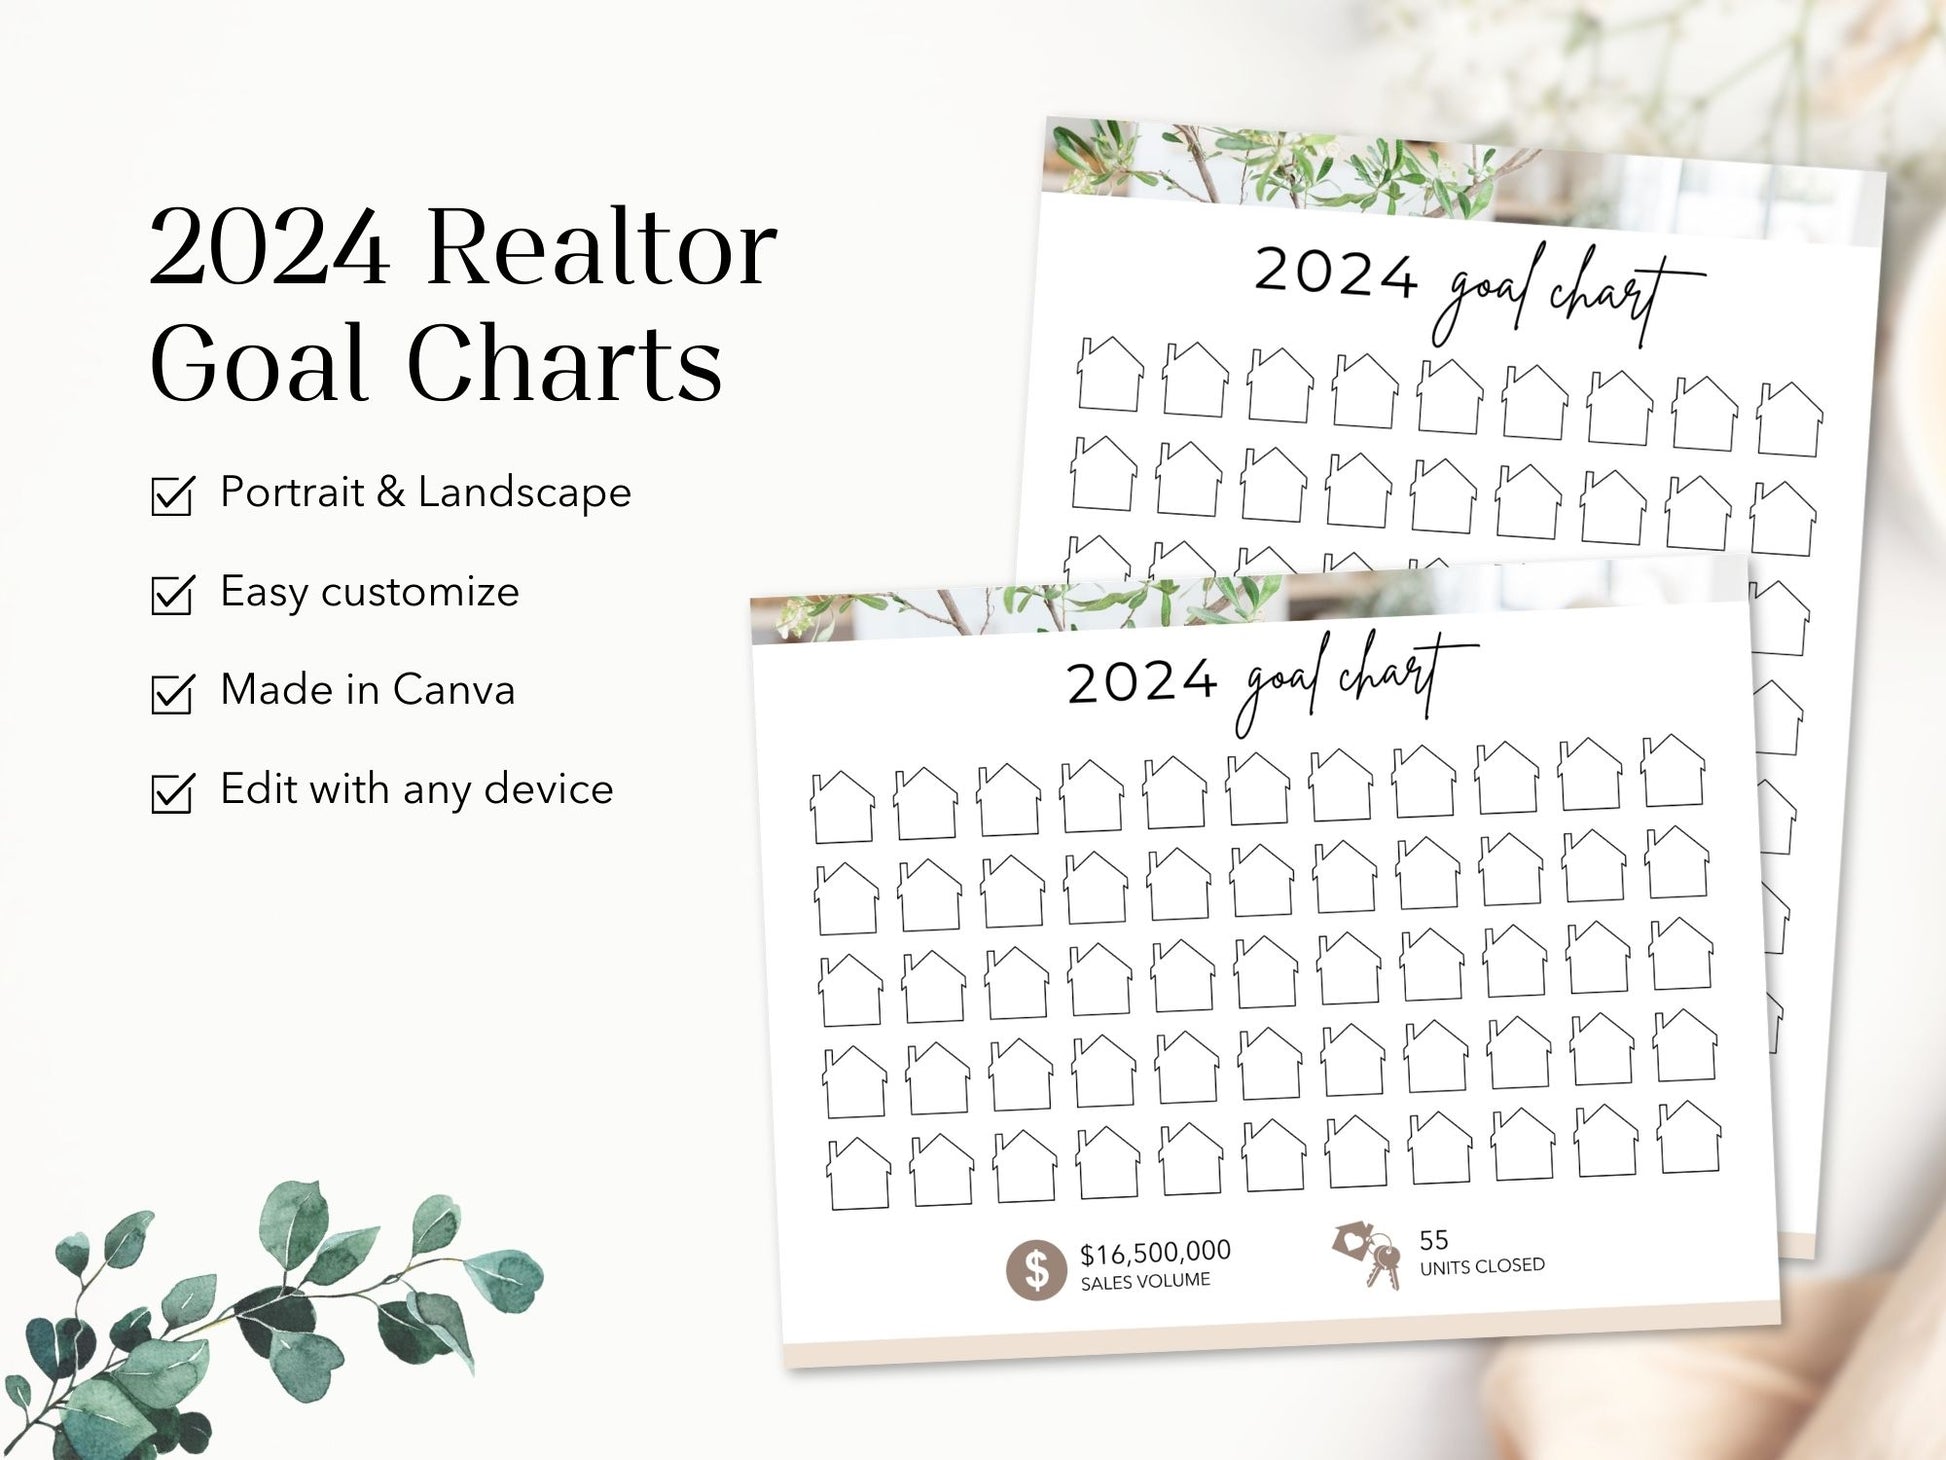 Real Estate 2024 Realtor Goal Chart - Comprehensive chart for goal setting and tracking, providing a motivational and practical tool for achieving real estate milestones in the year 2024.